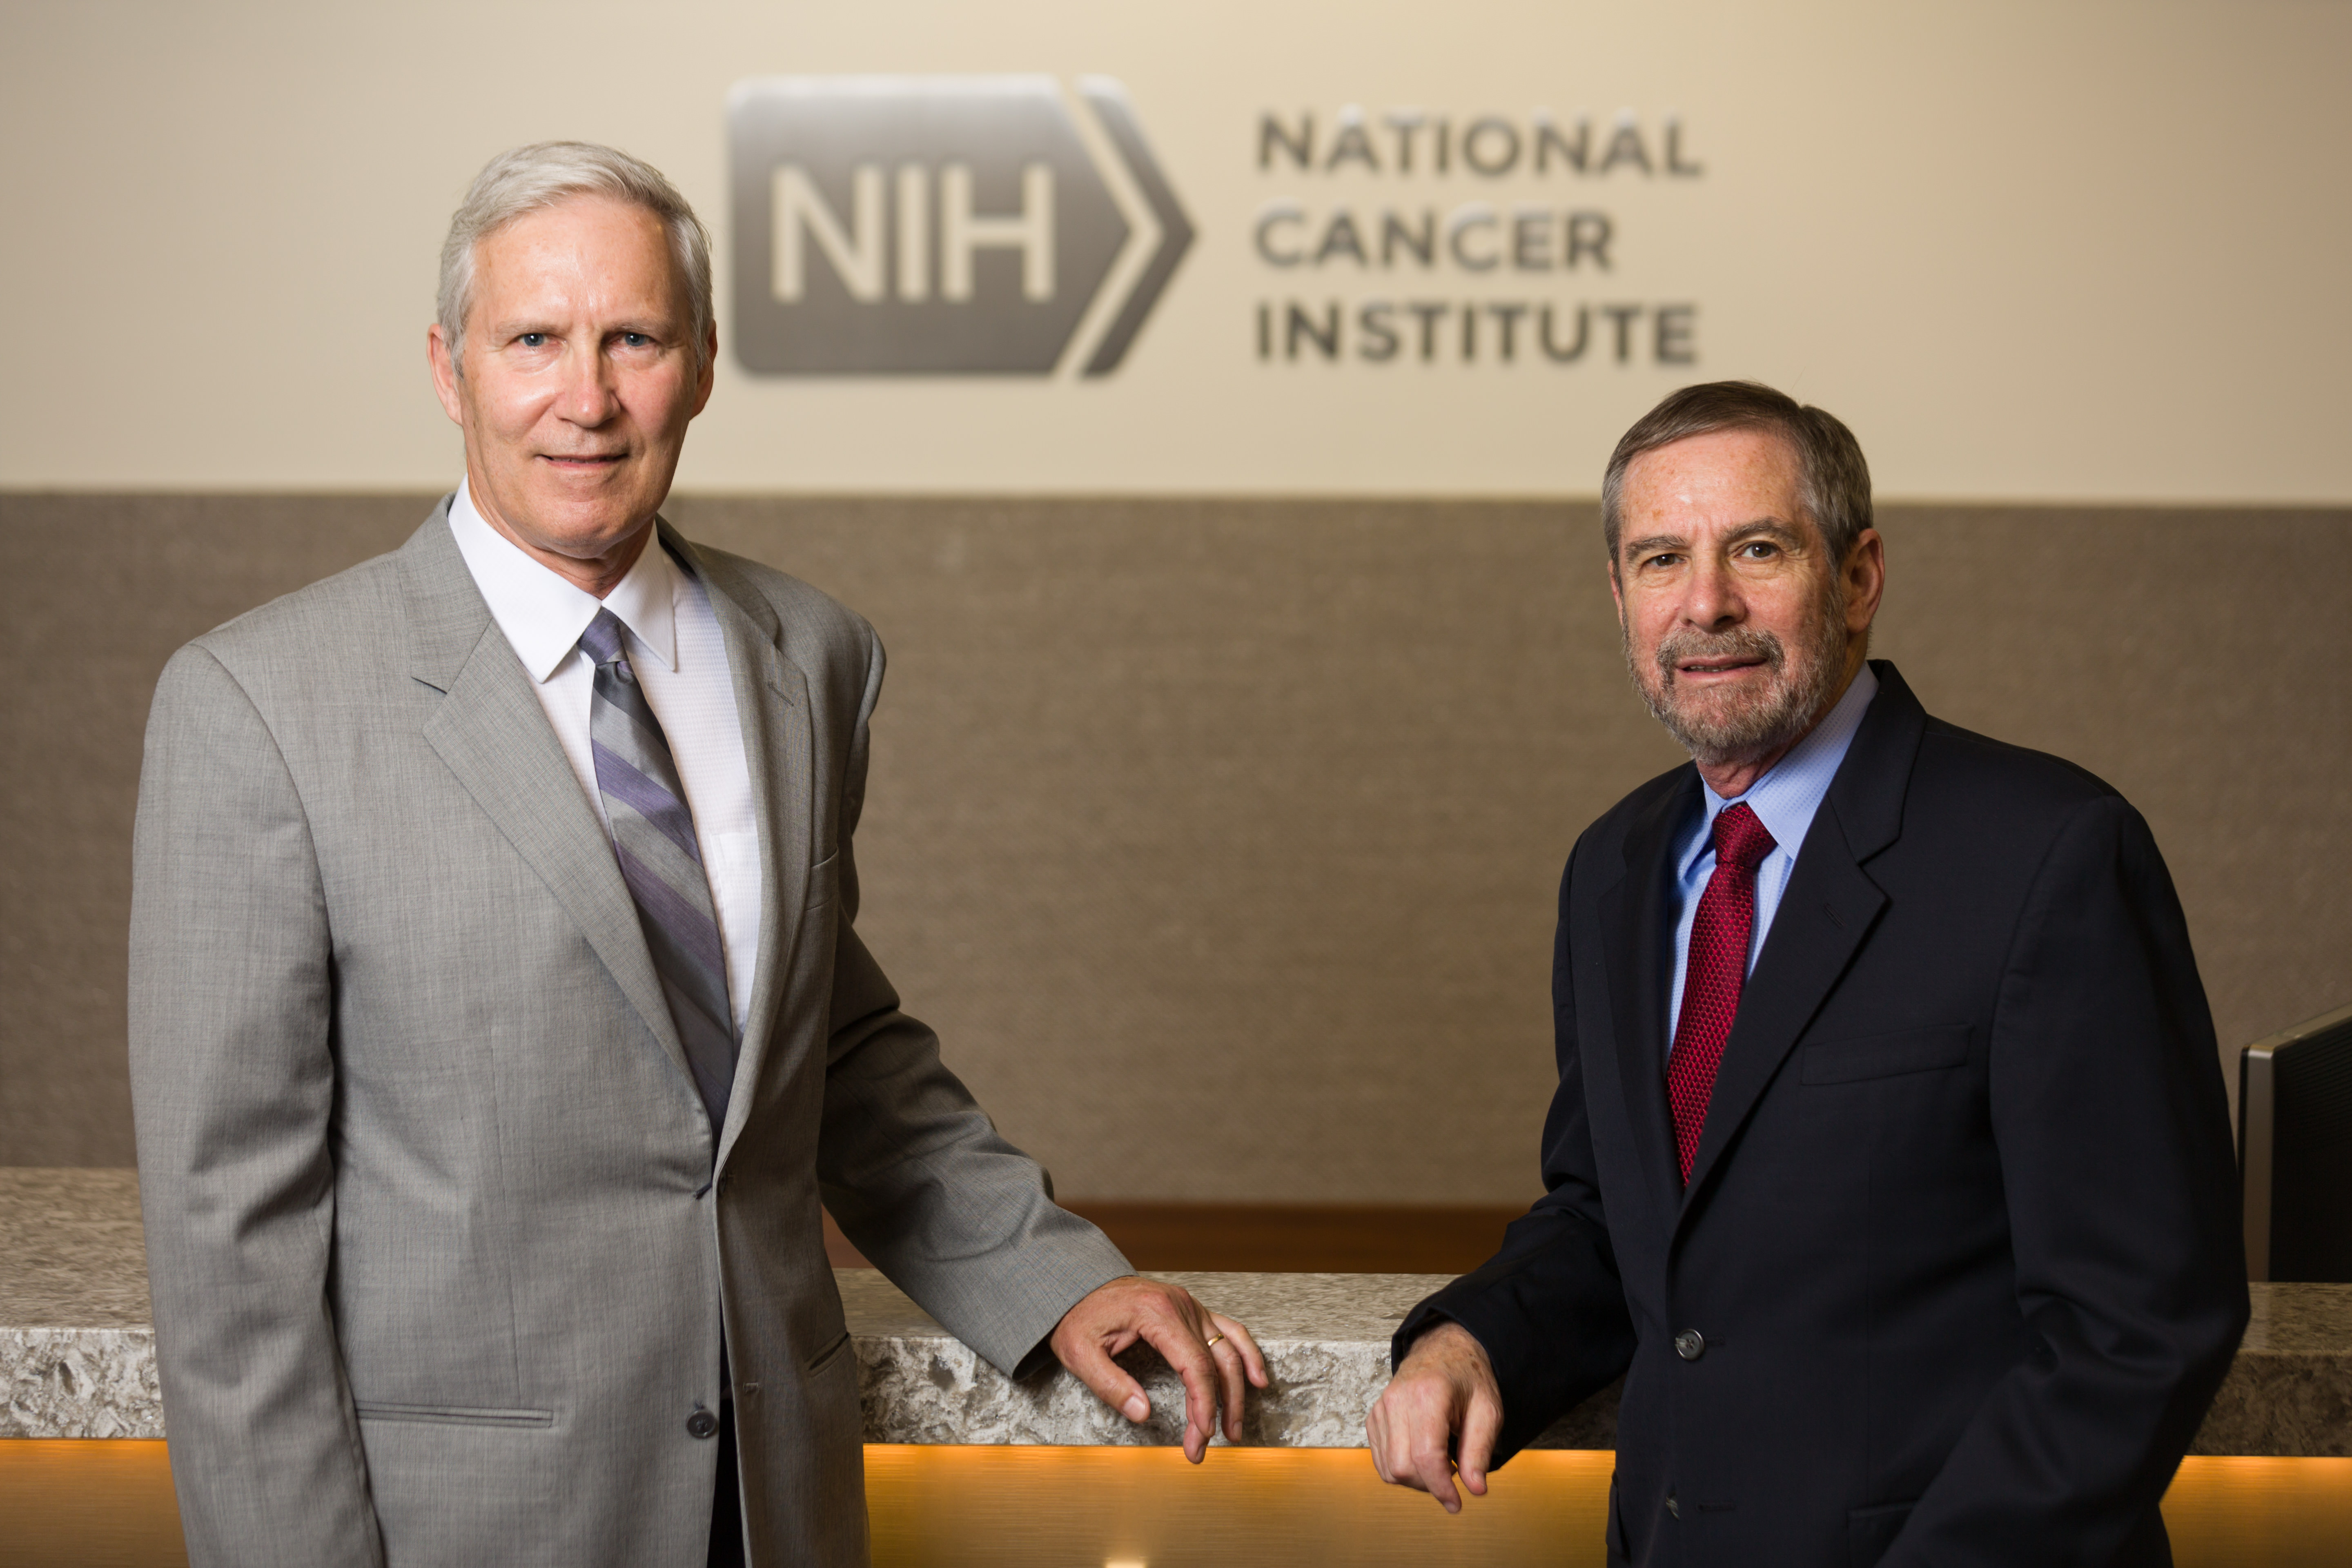 John T. Schiller and Douglas R. Lowy standing in front of the NCI logo